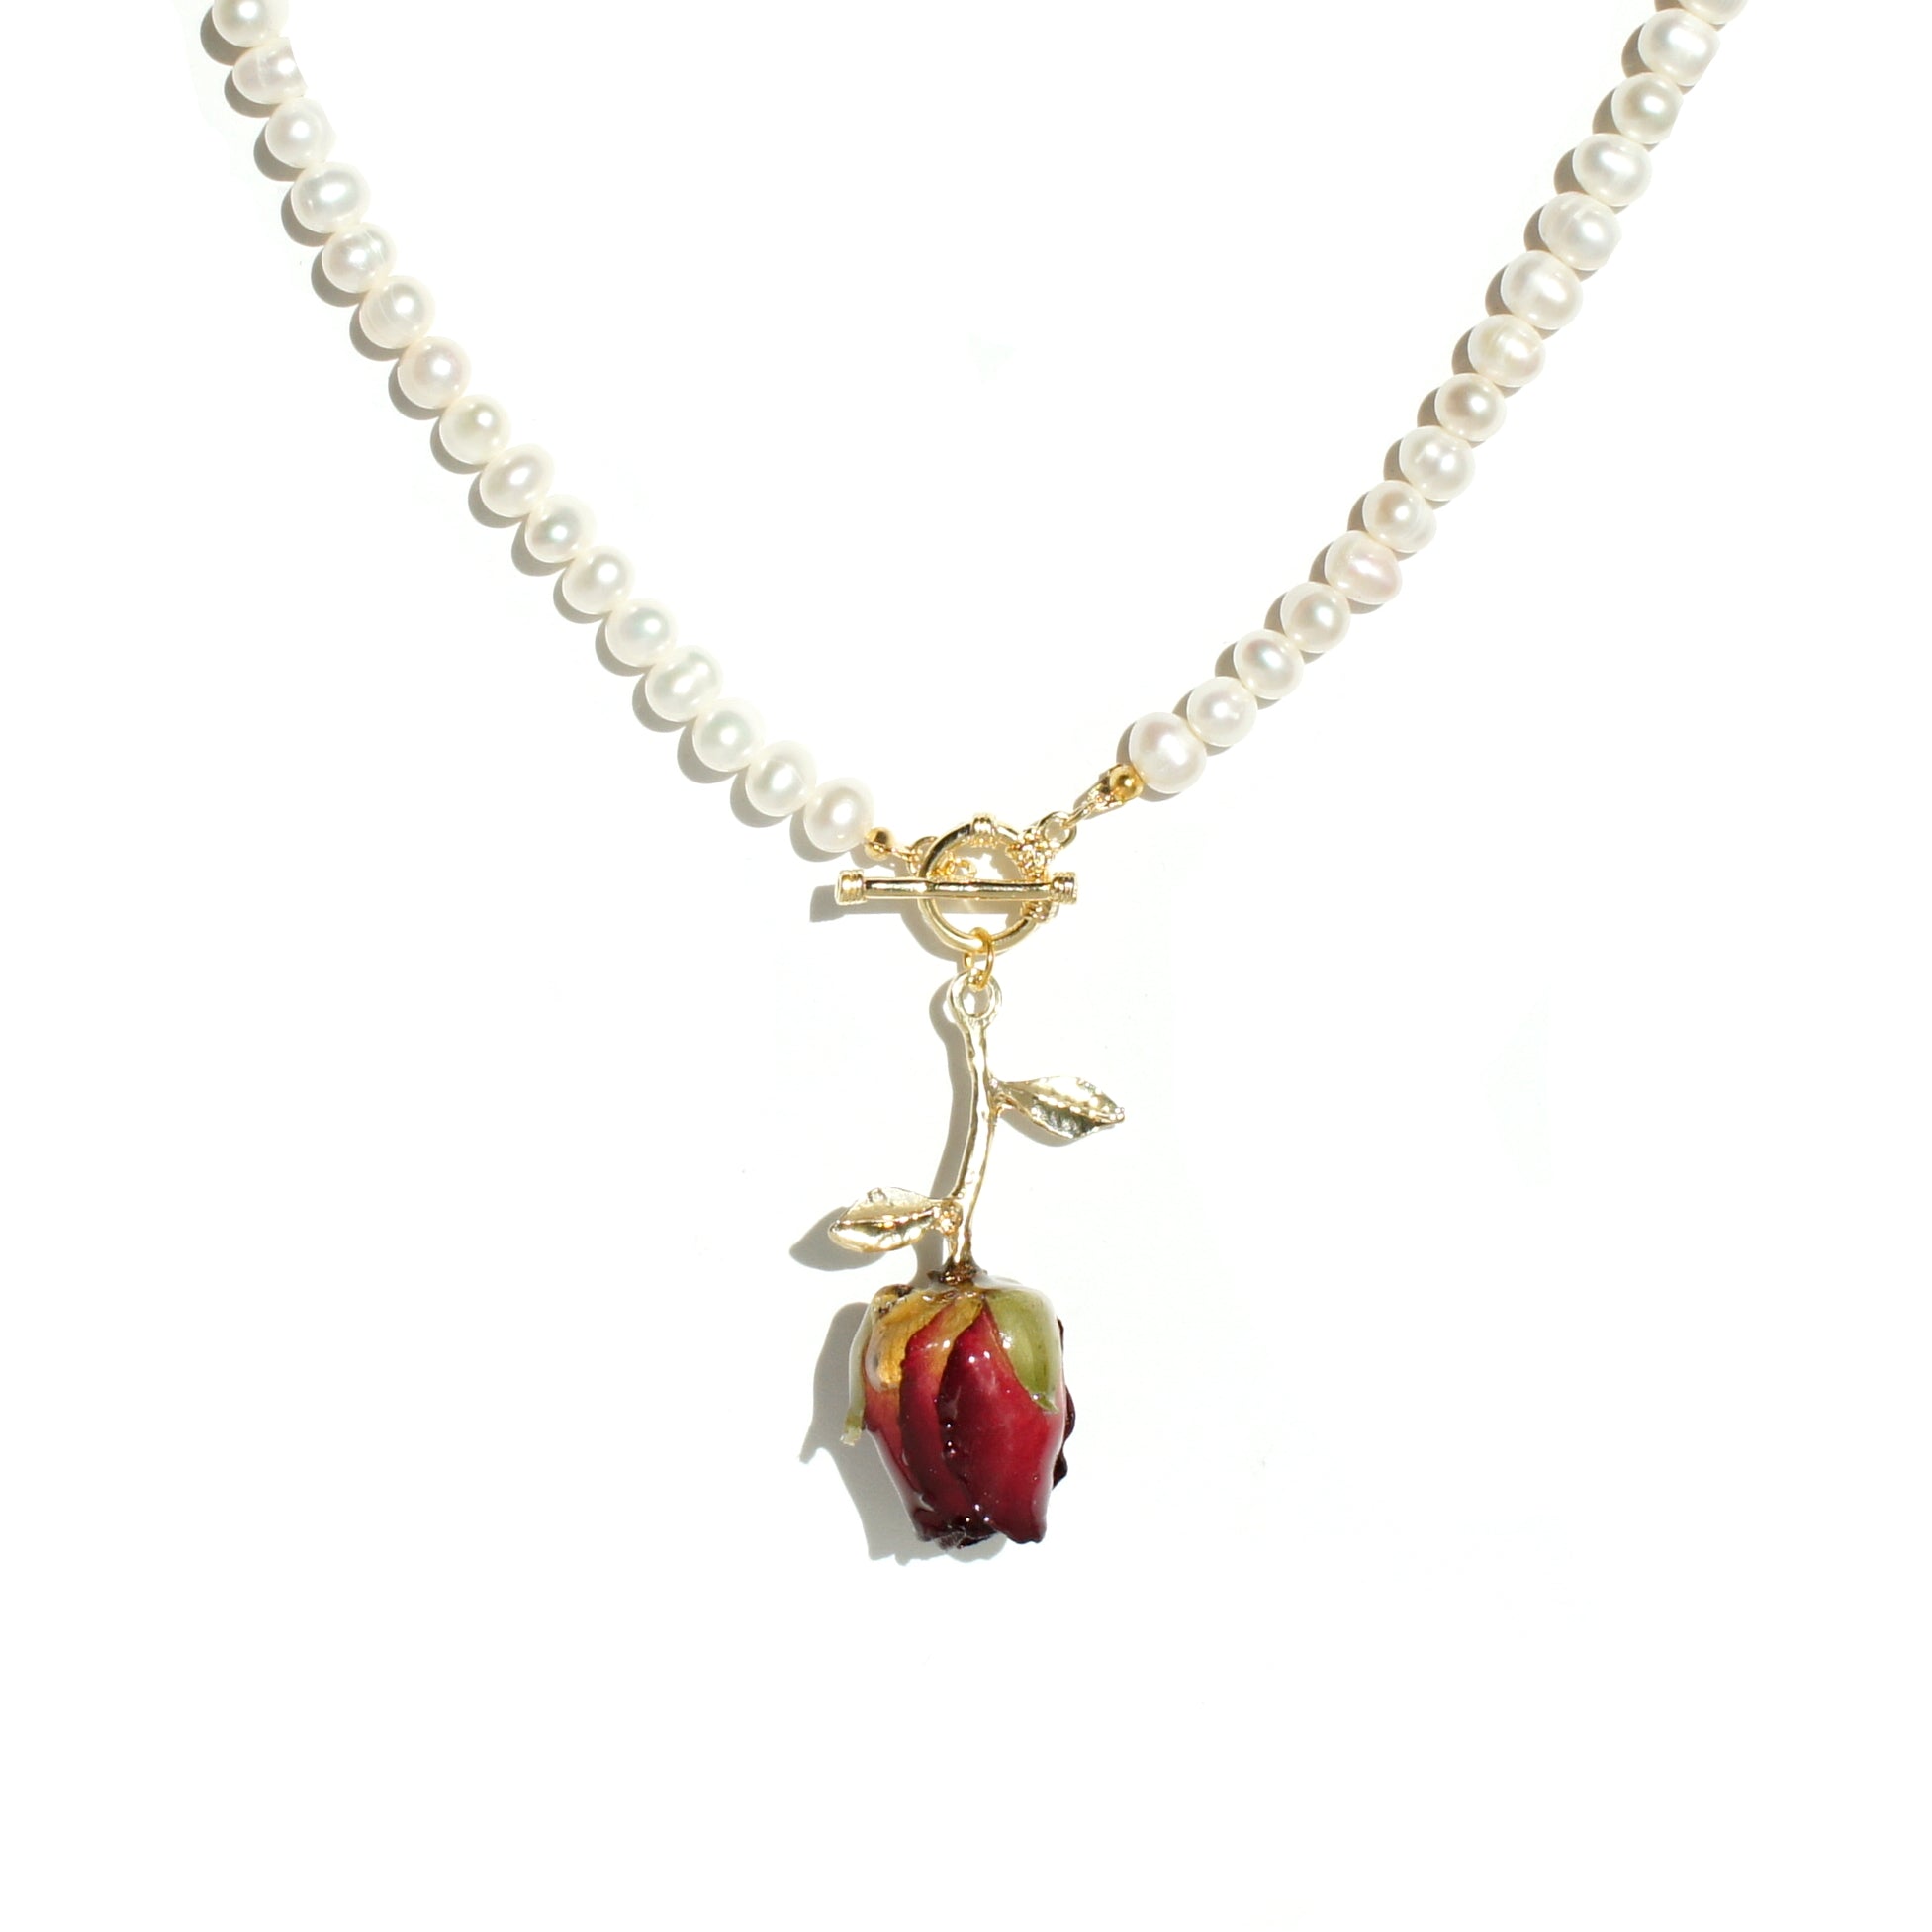 *REAL FLOWER* Grande Amore Freshwater Pearl Choker Necklace with Rosebud Pendant